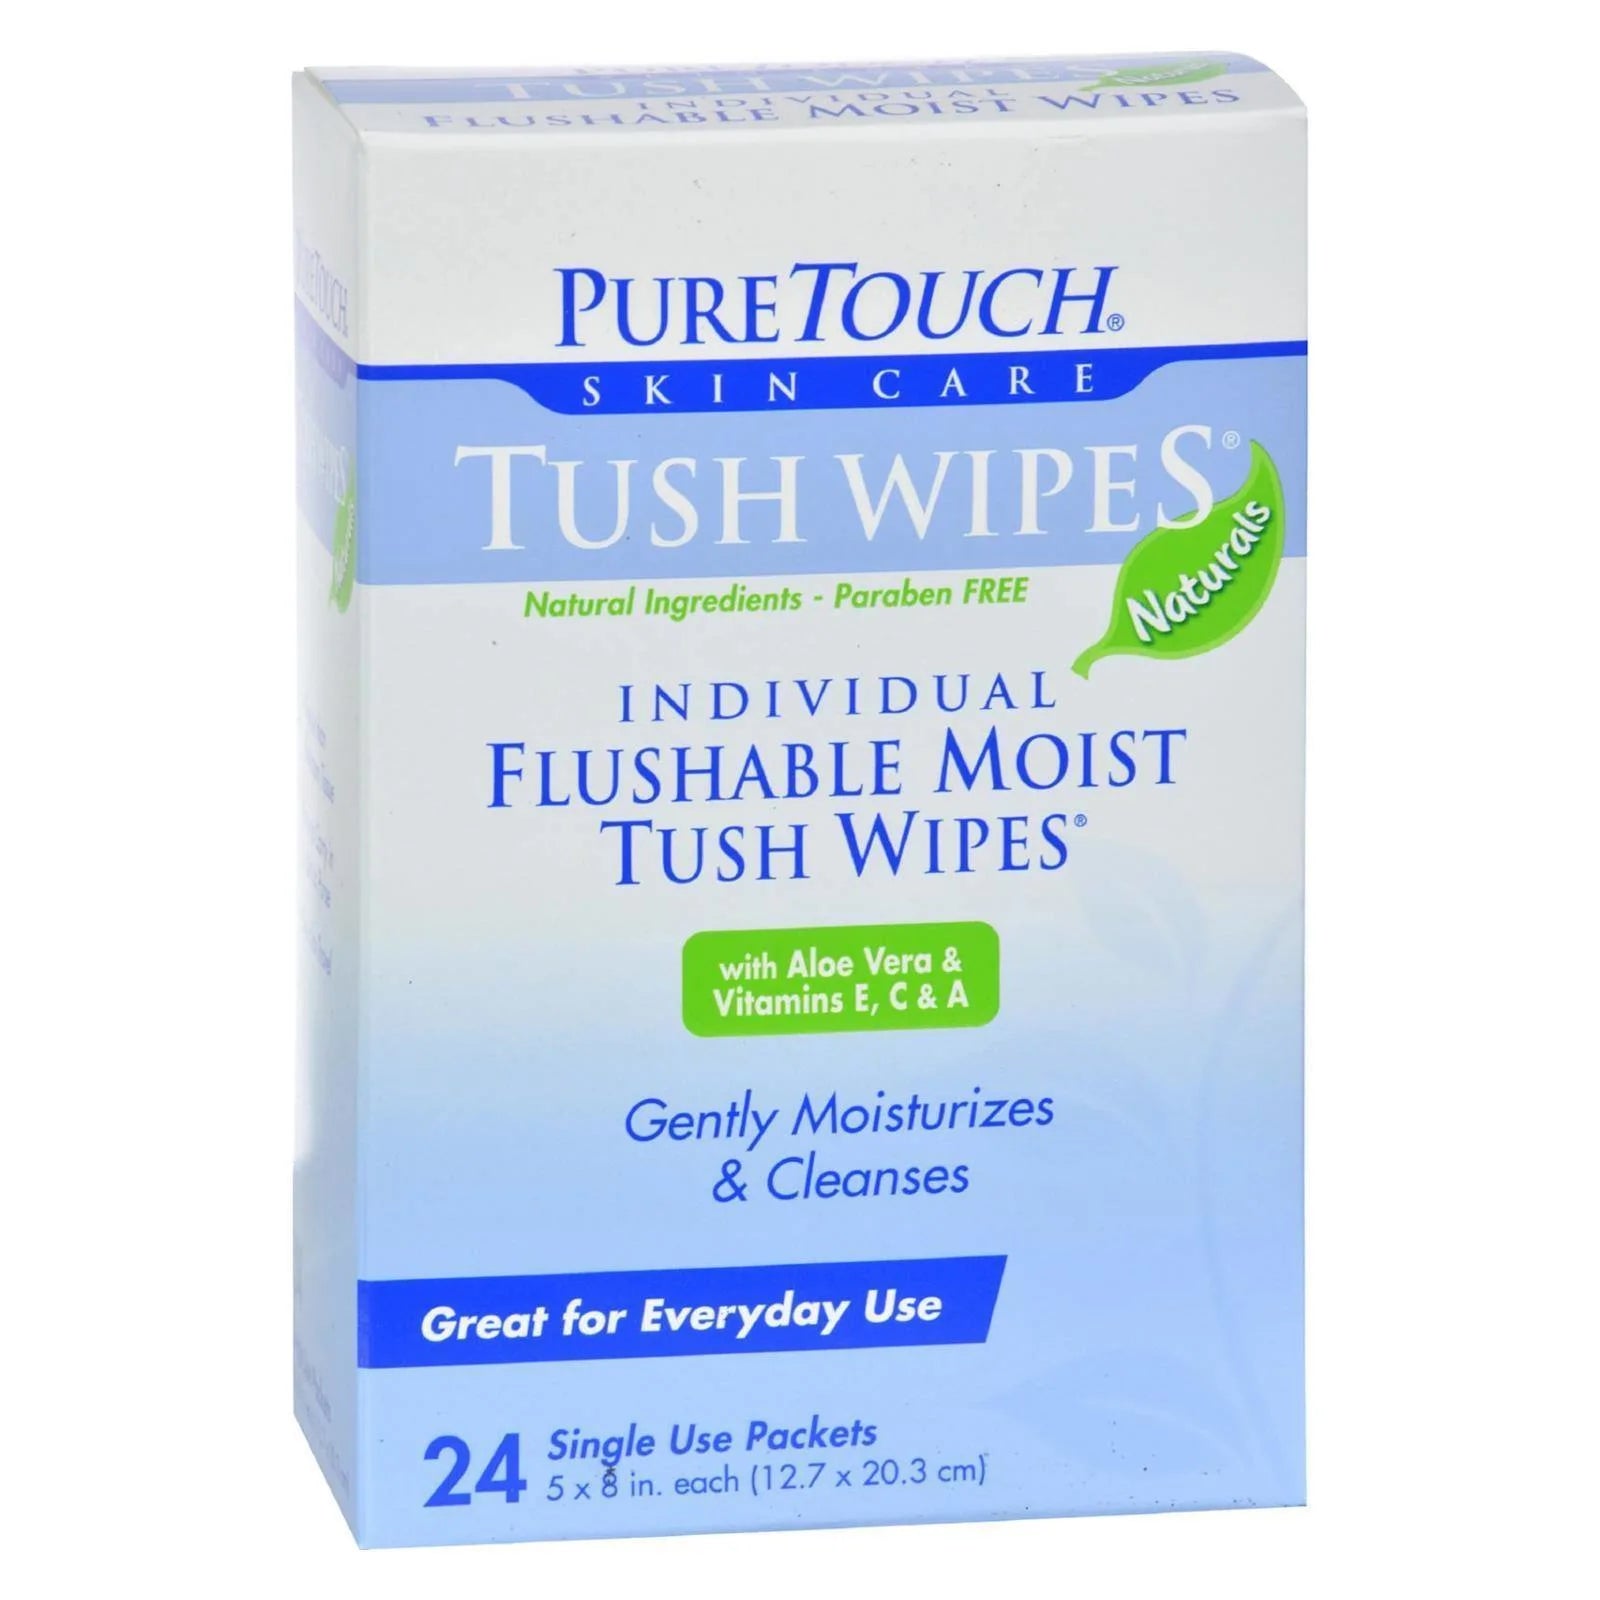 Puretouch Flushable Wipes - Moist Feminine Wipes Individually Wrapped Wet Tissue - 24 Packets Travel Size Personal Wipes